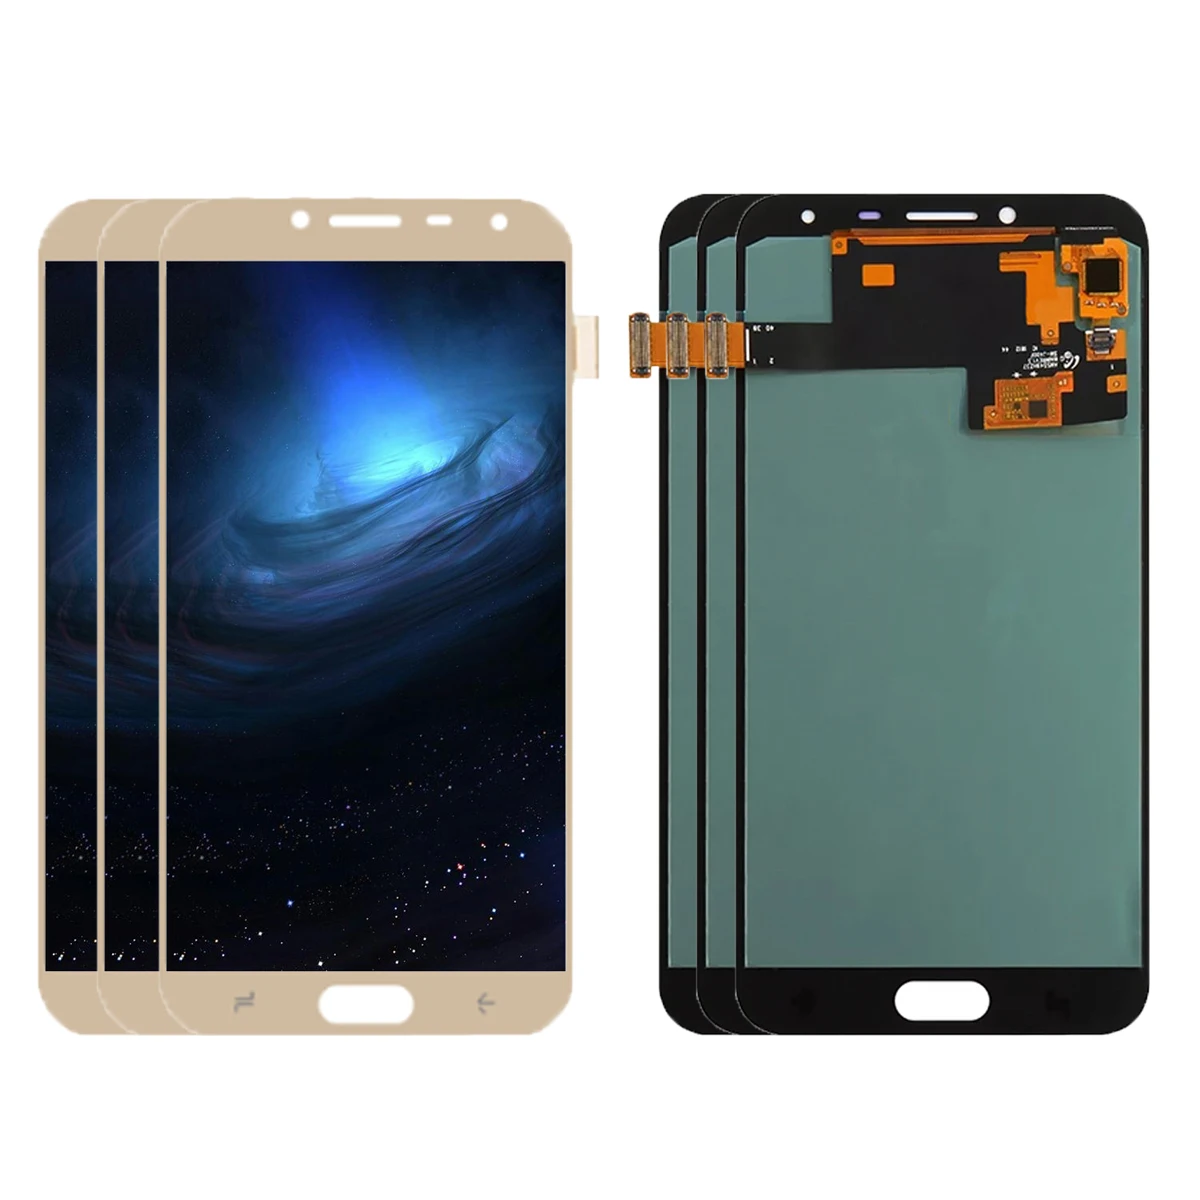 3/5 PCS Wholesale LCD For Samsung Galaxy J4 2018 J400 SM-J400F J400H J400M J400G/DS Display with Touch Screen Digitizer Assembly enlarge